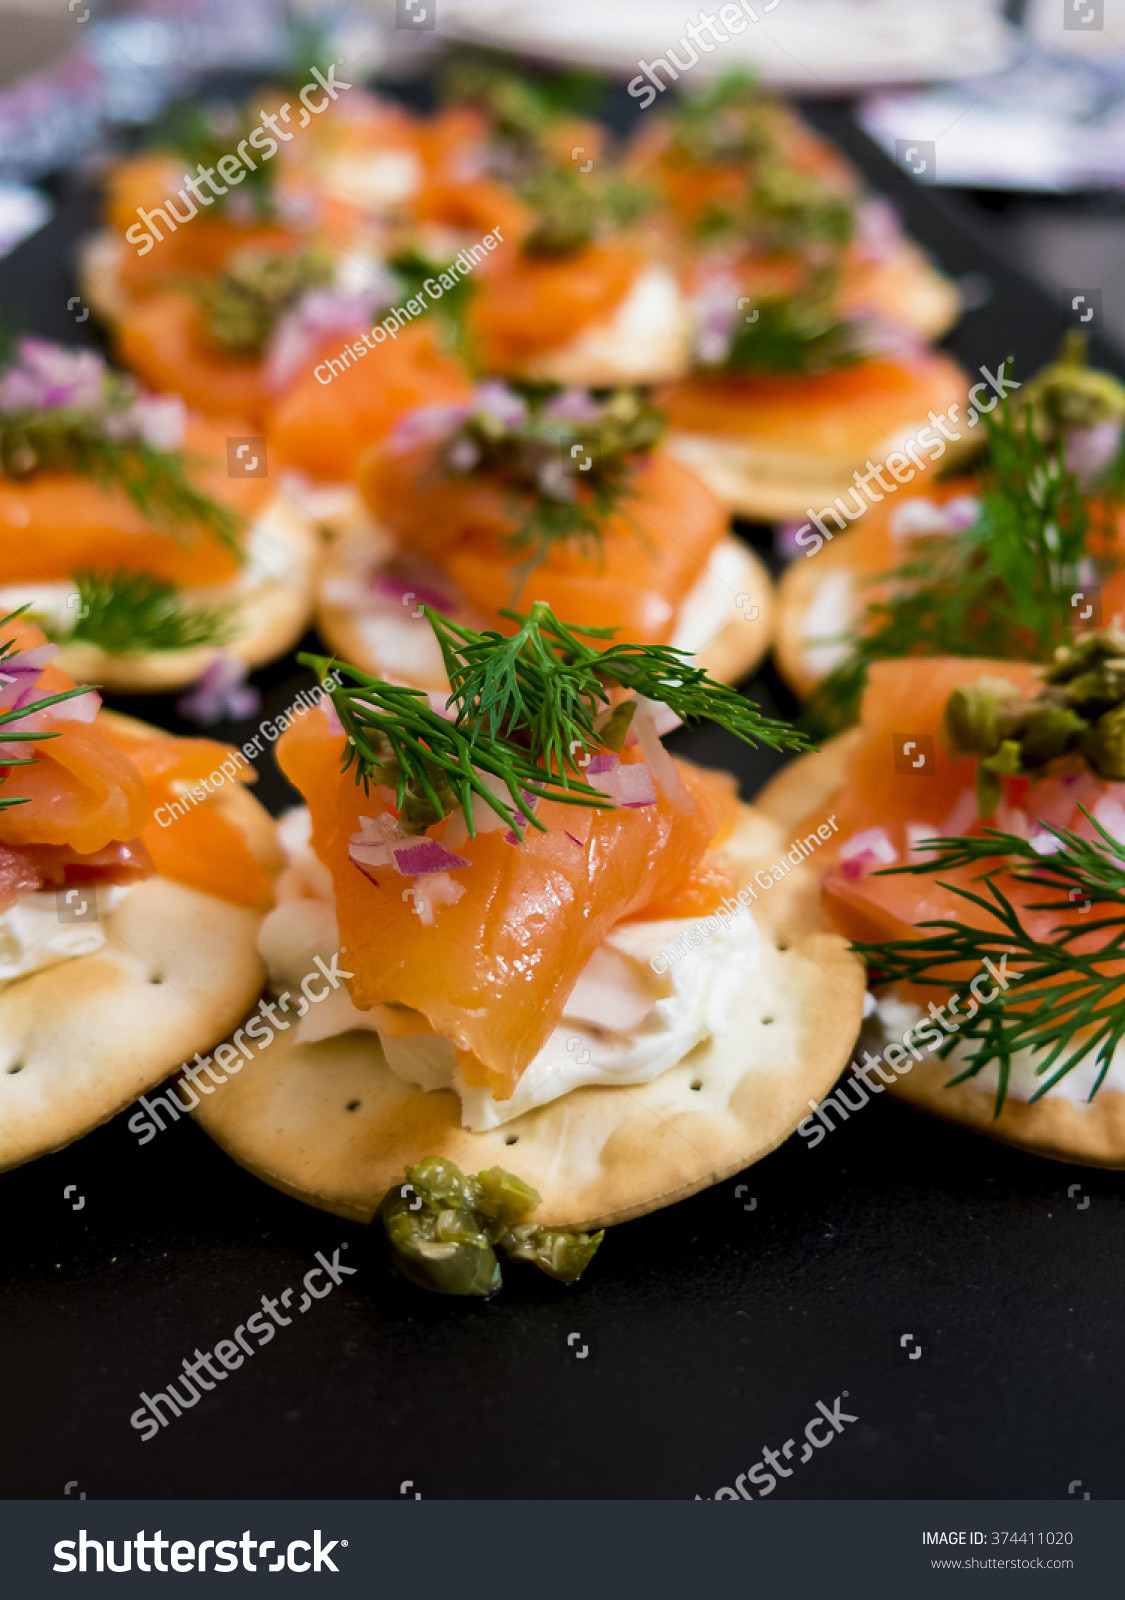 Smoked Salmon And Crackers Appetizer
 Smoked Salmon And Cracker Appetizer Stock